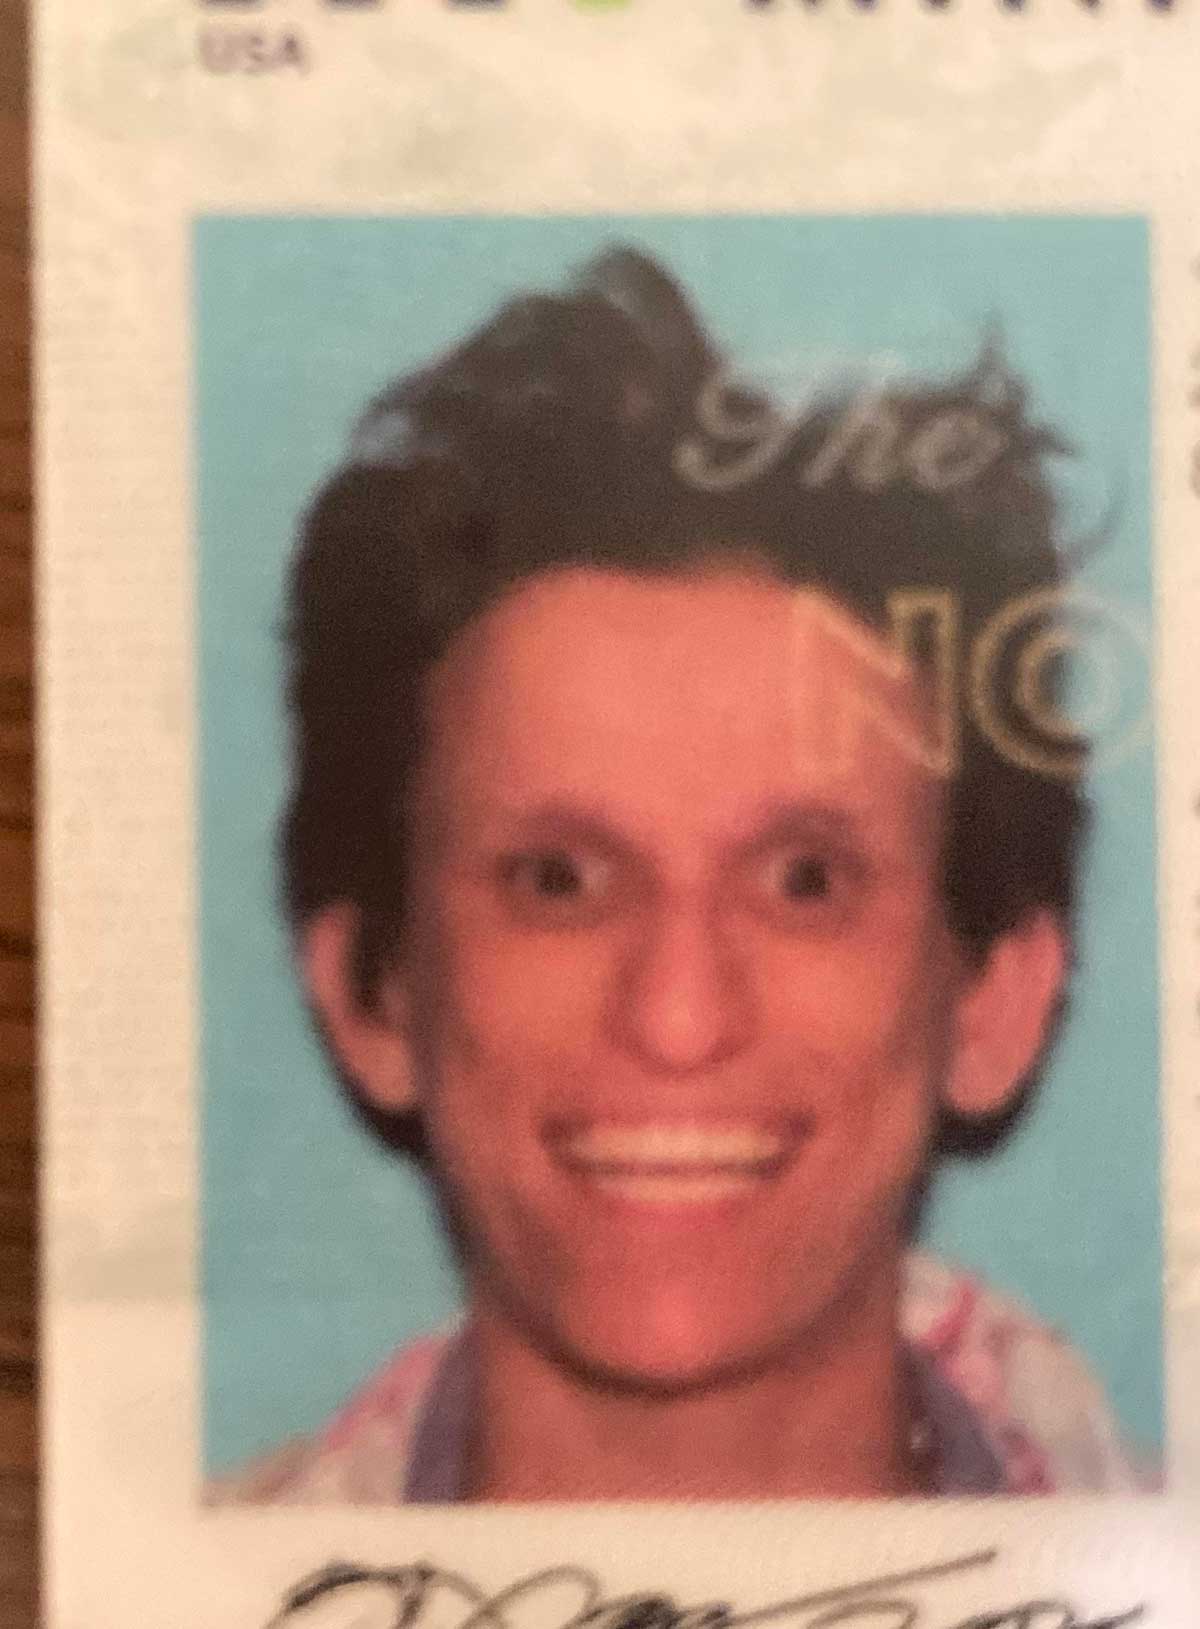 I thought I would share my bad ID photo